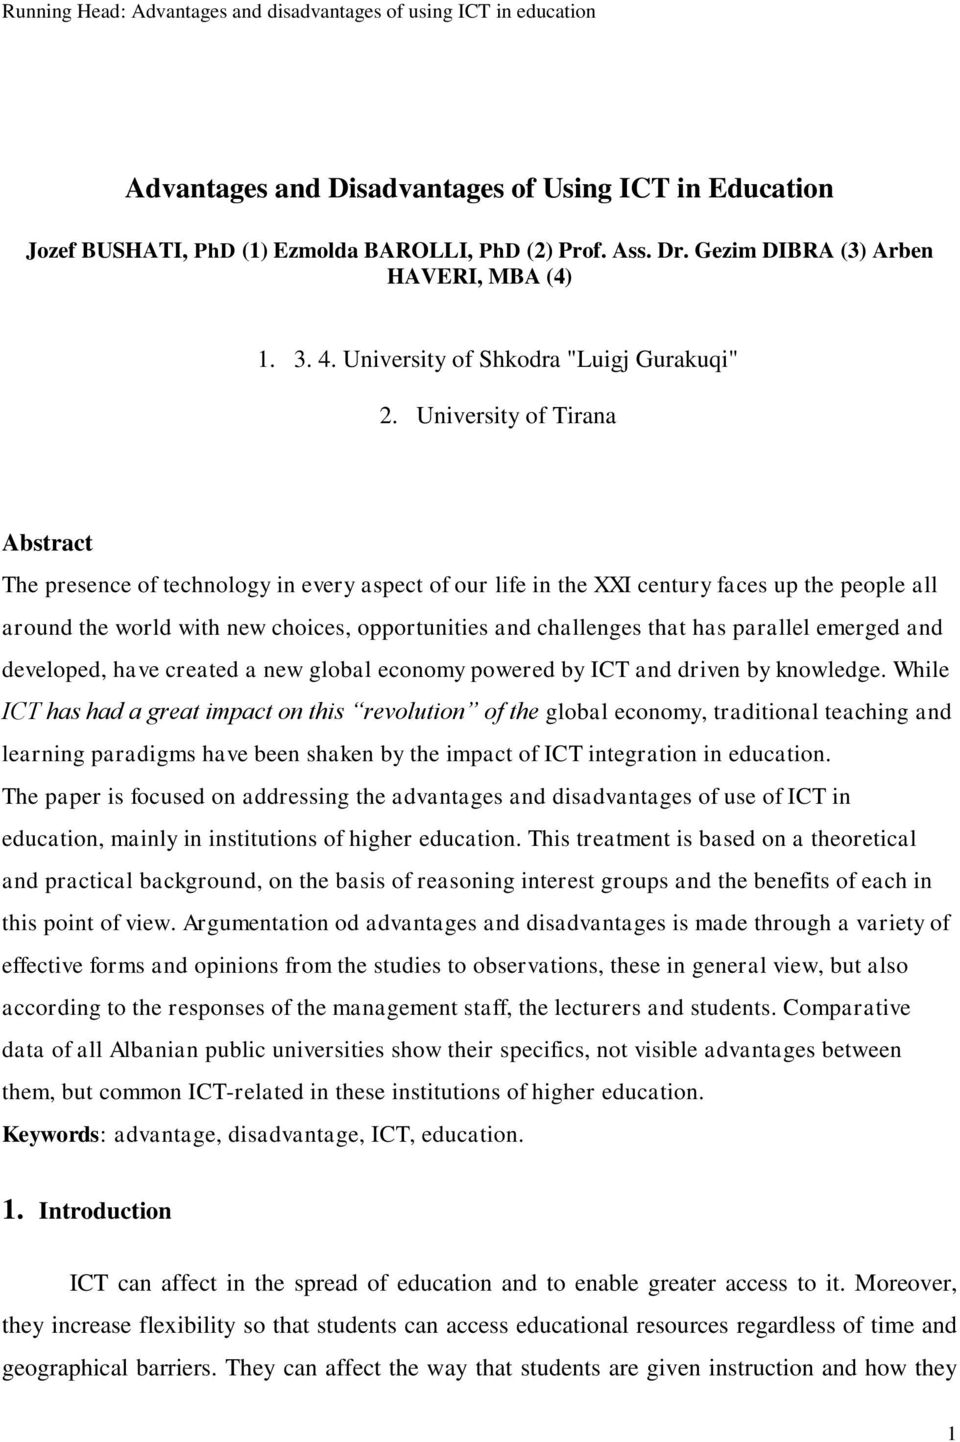 University of Tirana Abstract The presence of technology in every aspect of our life in the XXI century faces up the people all around the world with new choices, opportunities and challenges that